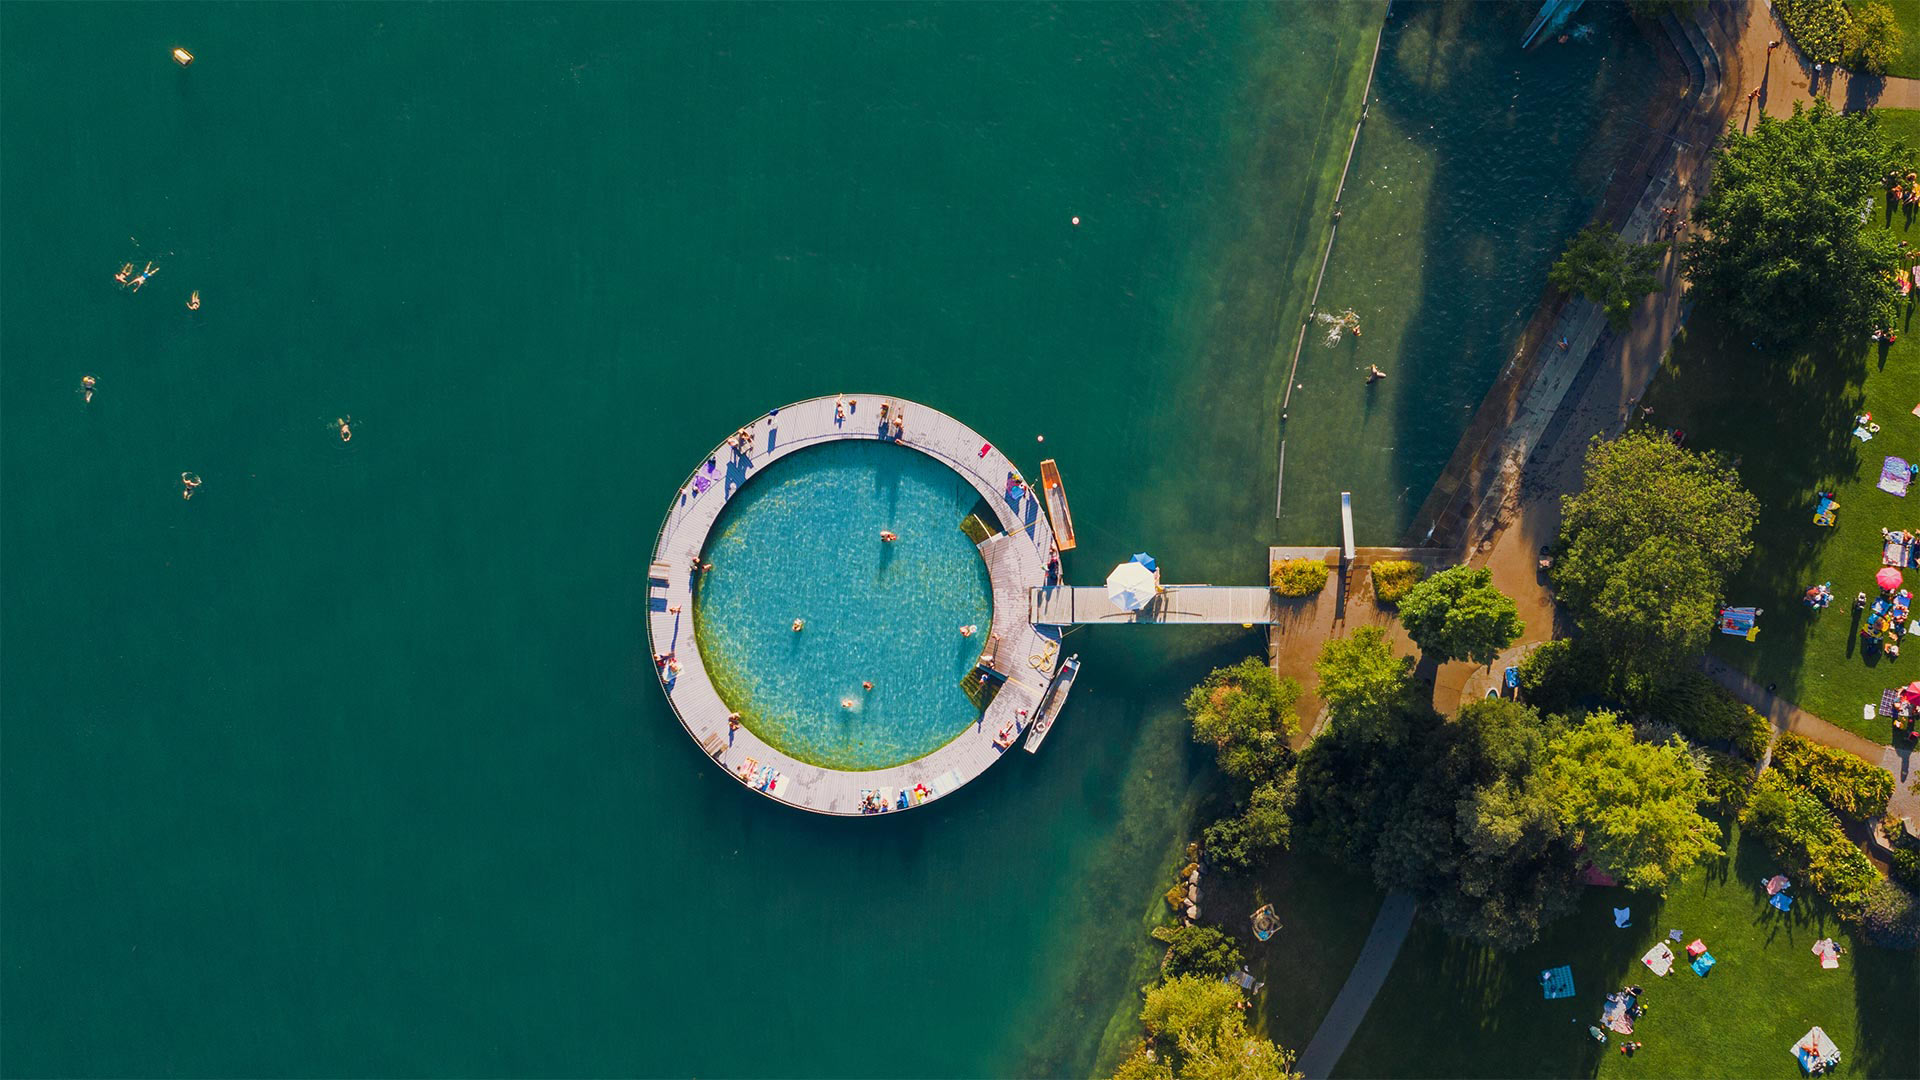 Strandbad Tiefenbrunnen, a public pool on the shore of Lake Zürich, Switzerland - Amazing Aerial Agency/Offset by Shutterstock)